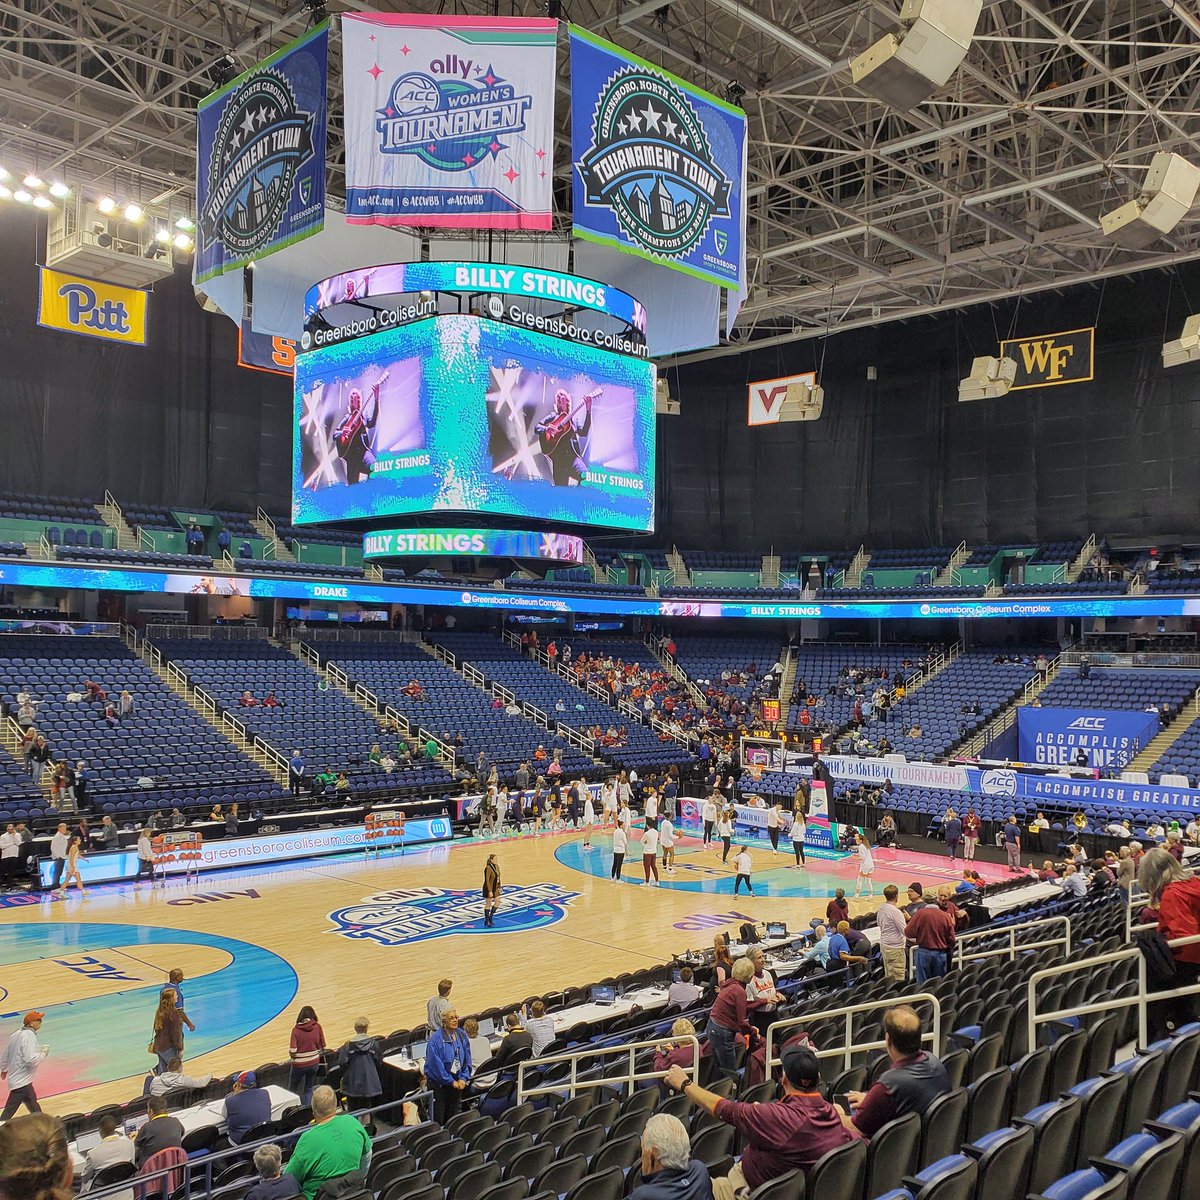 I'm here! Now everyone say a prayer that I am surrounded by Hokies!!! #Hokies #ACCWBB #ACCTWomens #TournamentTown